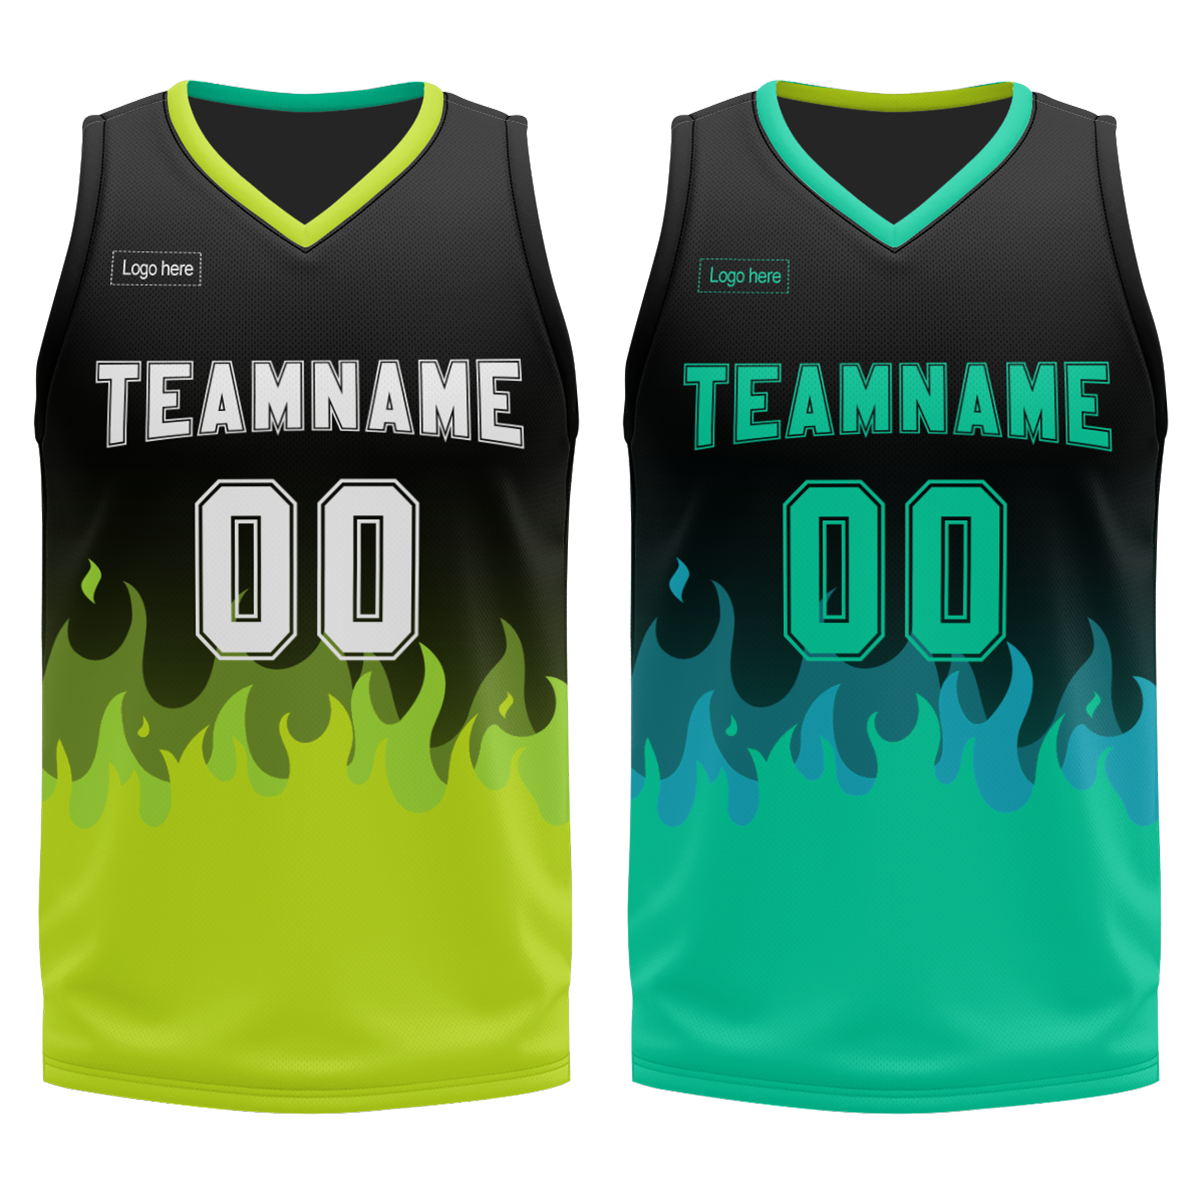 wholesale-custom-basketball-jerseys-sublimation-printed-reversible-mesh-performance-athletic-team-uniforms-for-sports-at-cj-pod-4